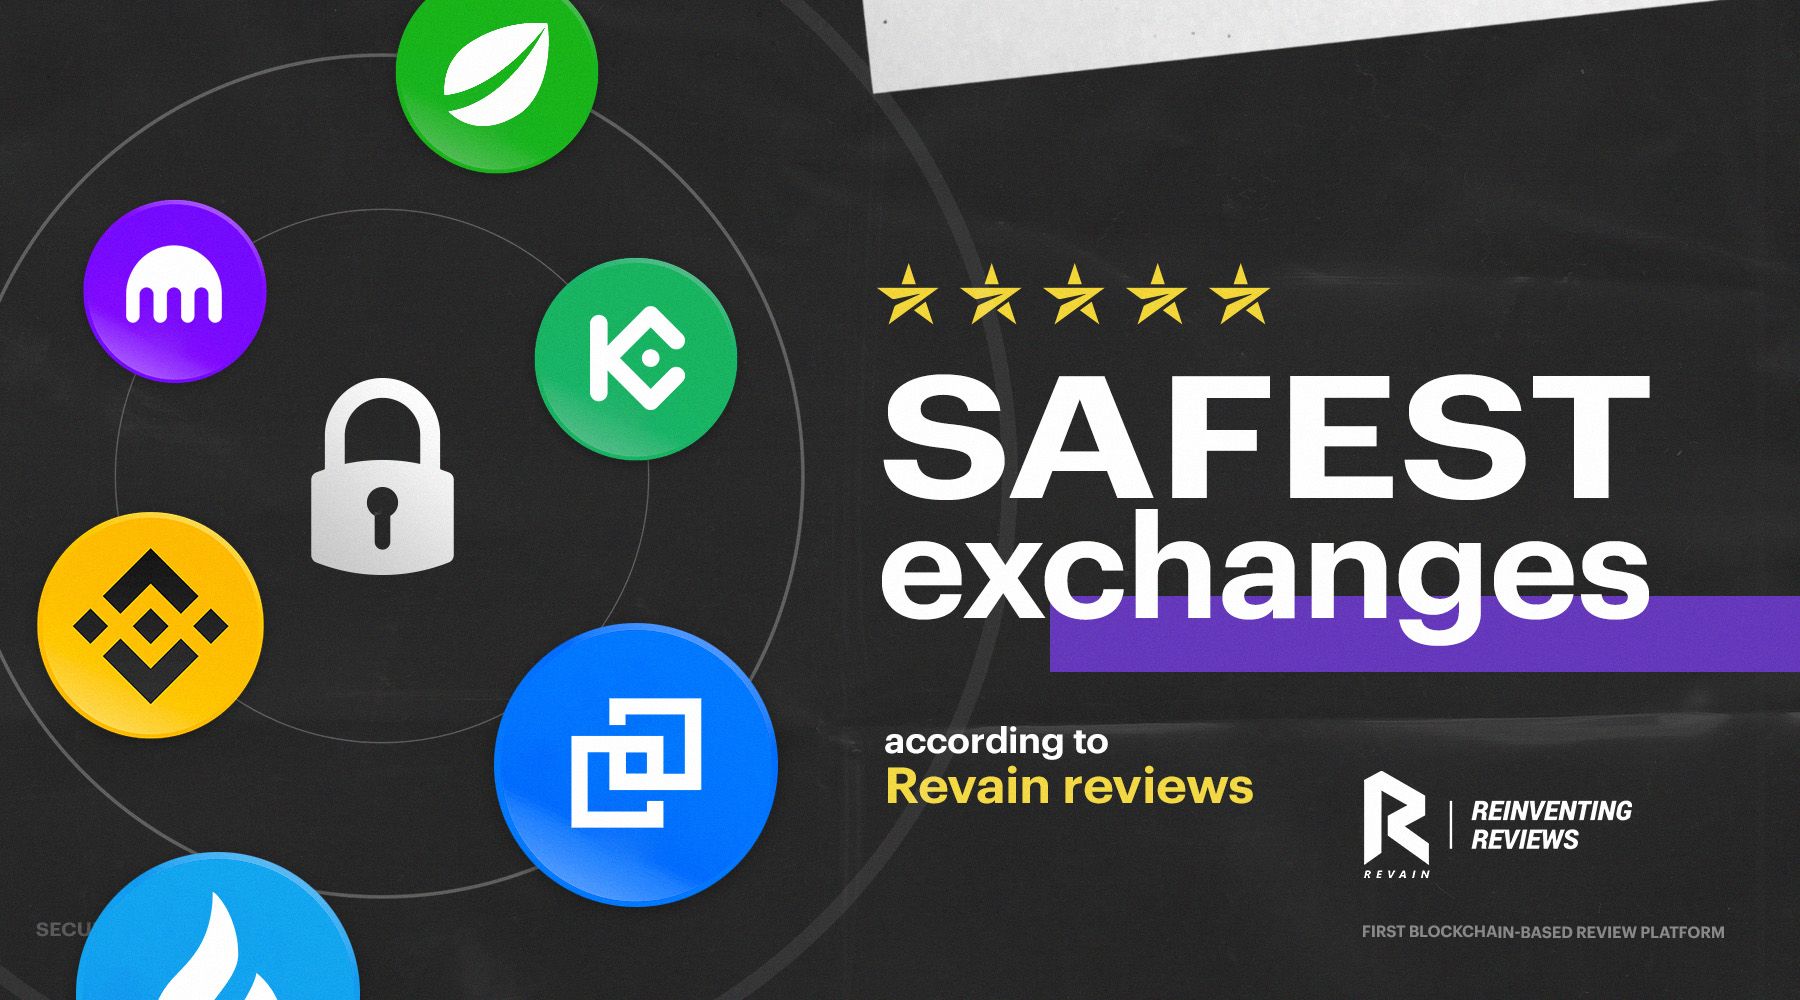 Top 10 Exchanges with the highest security level according to Revain reviews